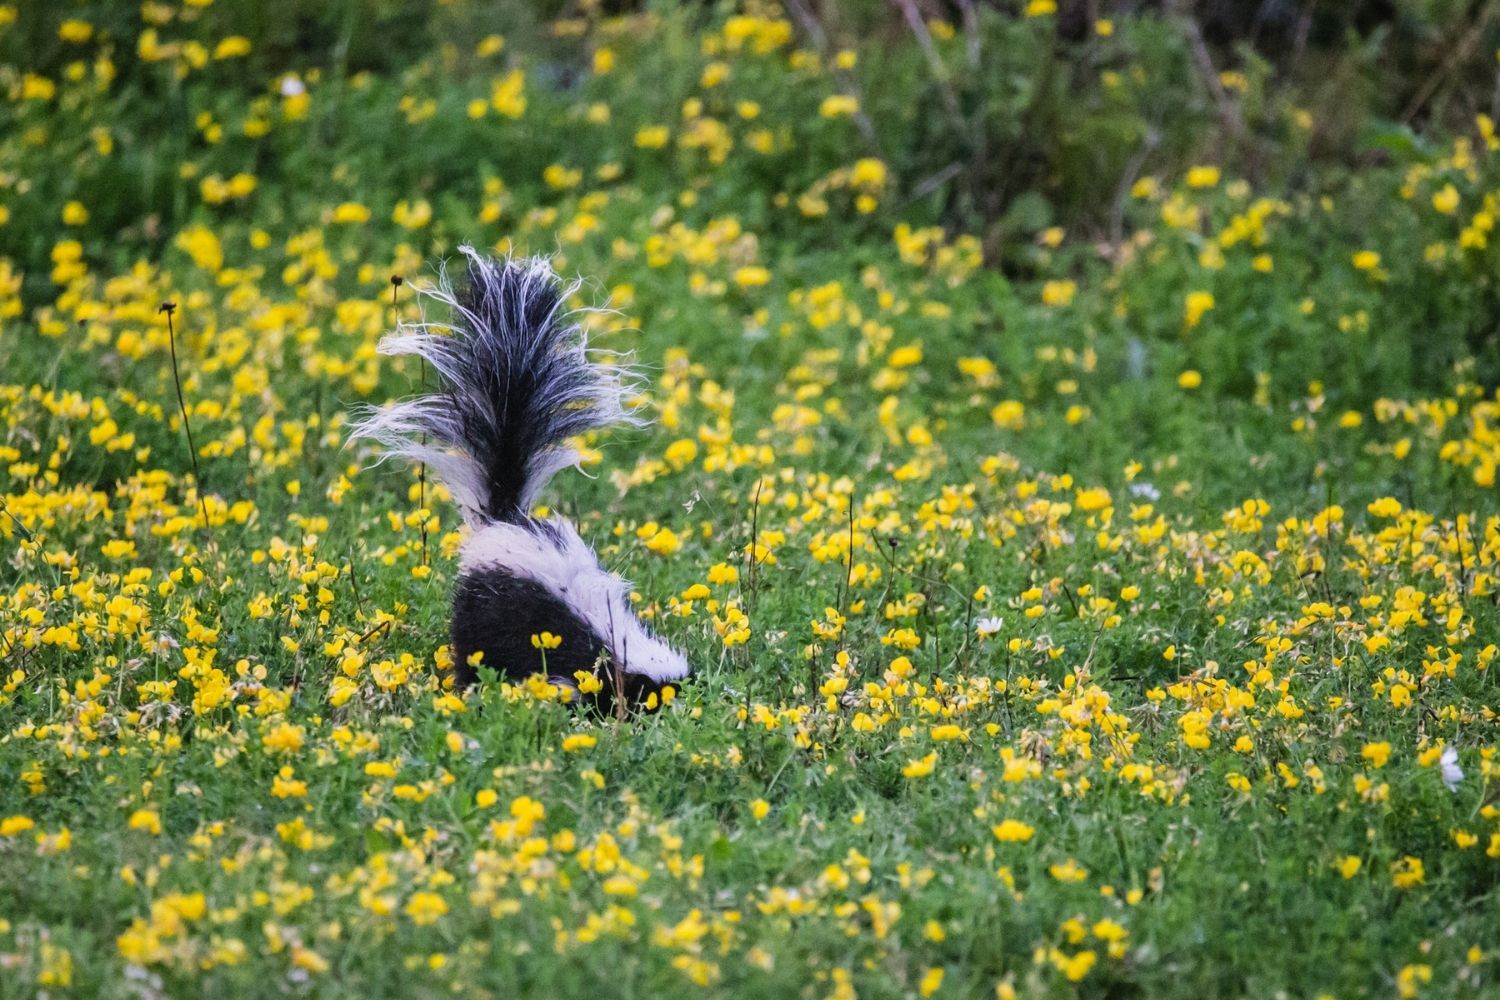 A skunk with its tail up in a large field of yellow wildflowers.